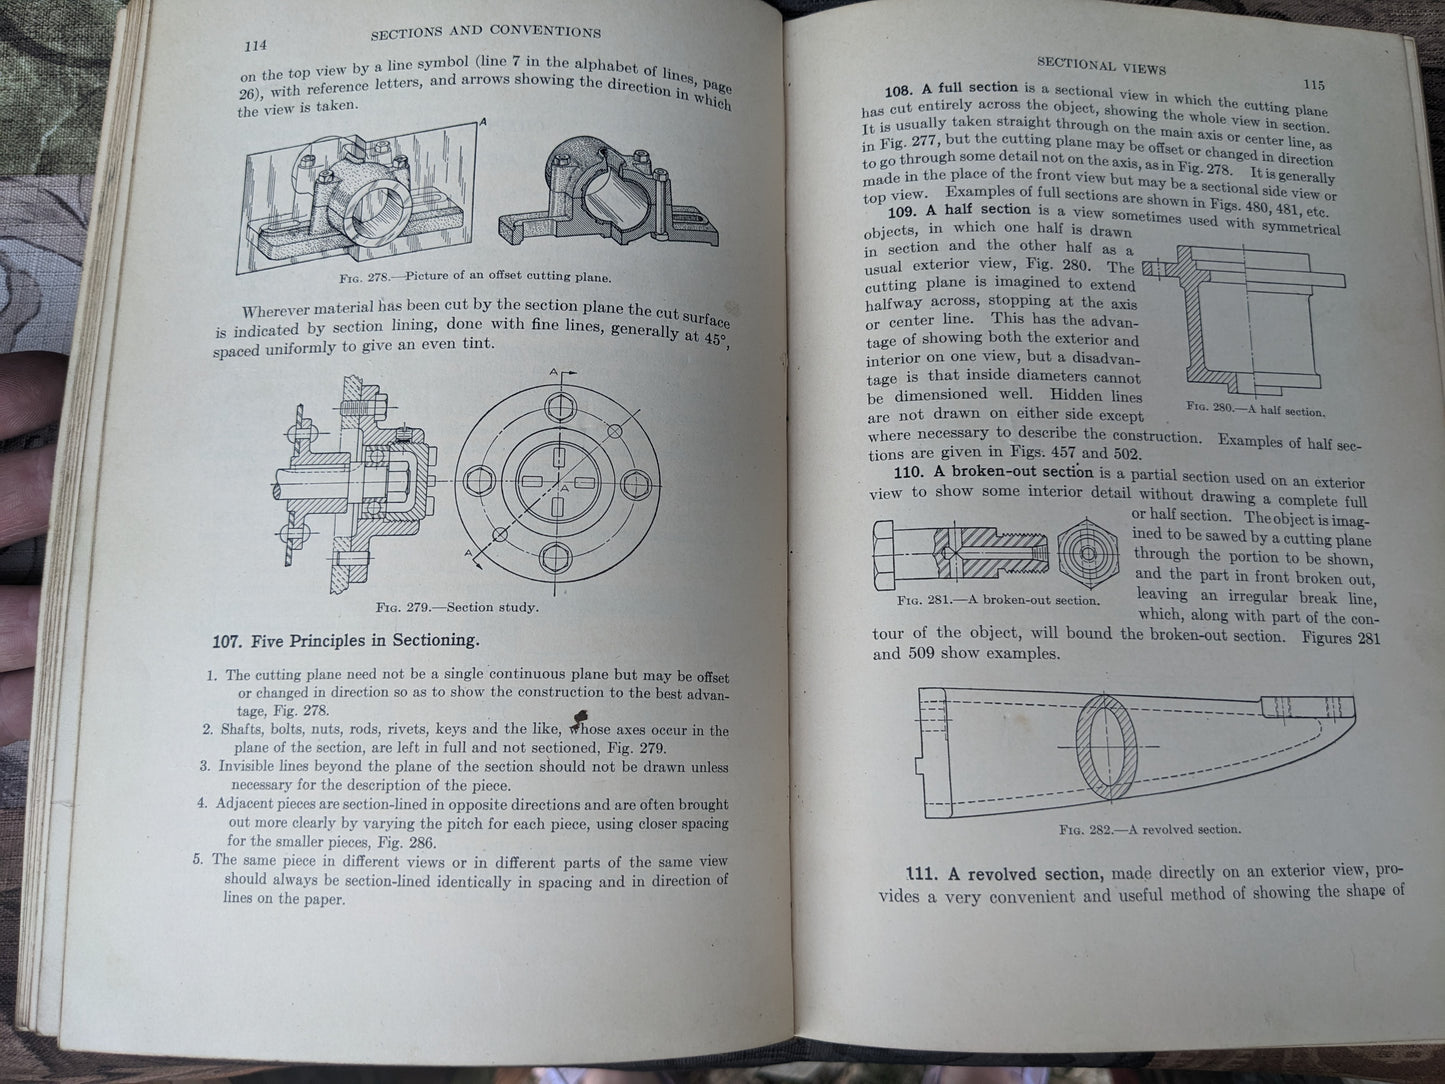 A Manual of Engineering Drawing for Students & Draftsmen, Thomas French, 1937